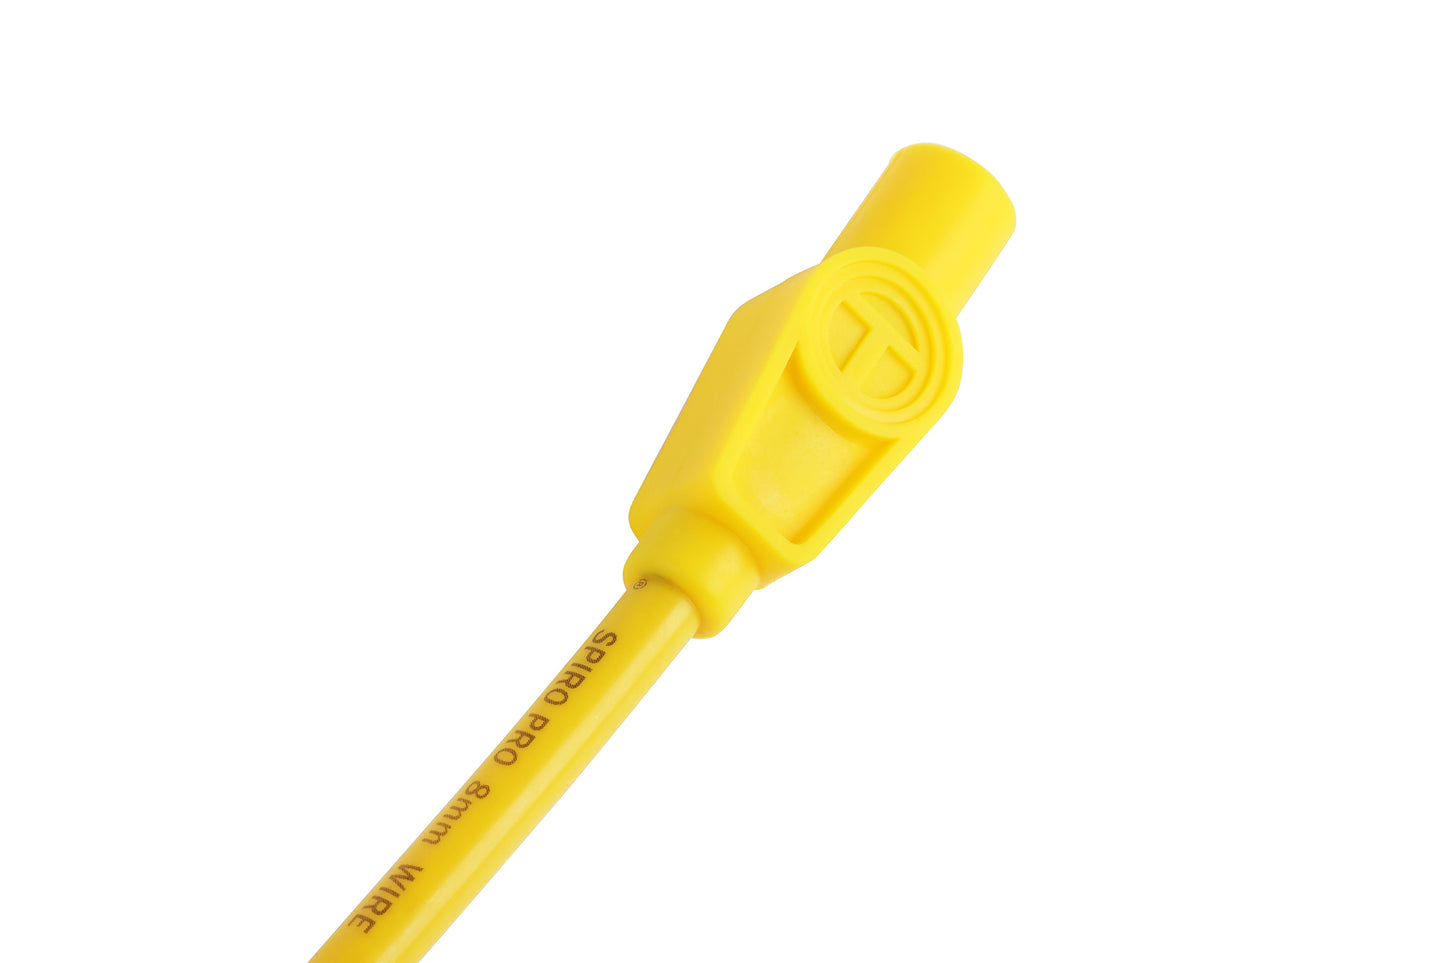 Taylor Cable 73455 8mm Spiro-Pro univ 8 cyl 180 Yellow